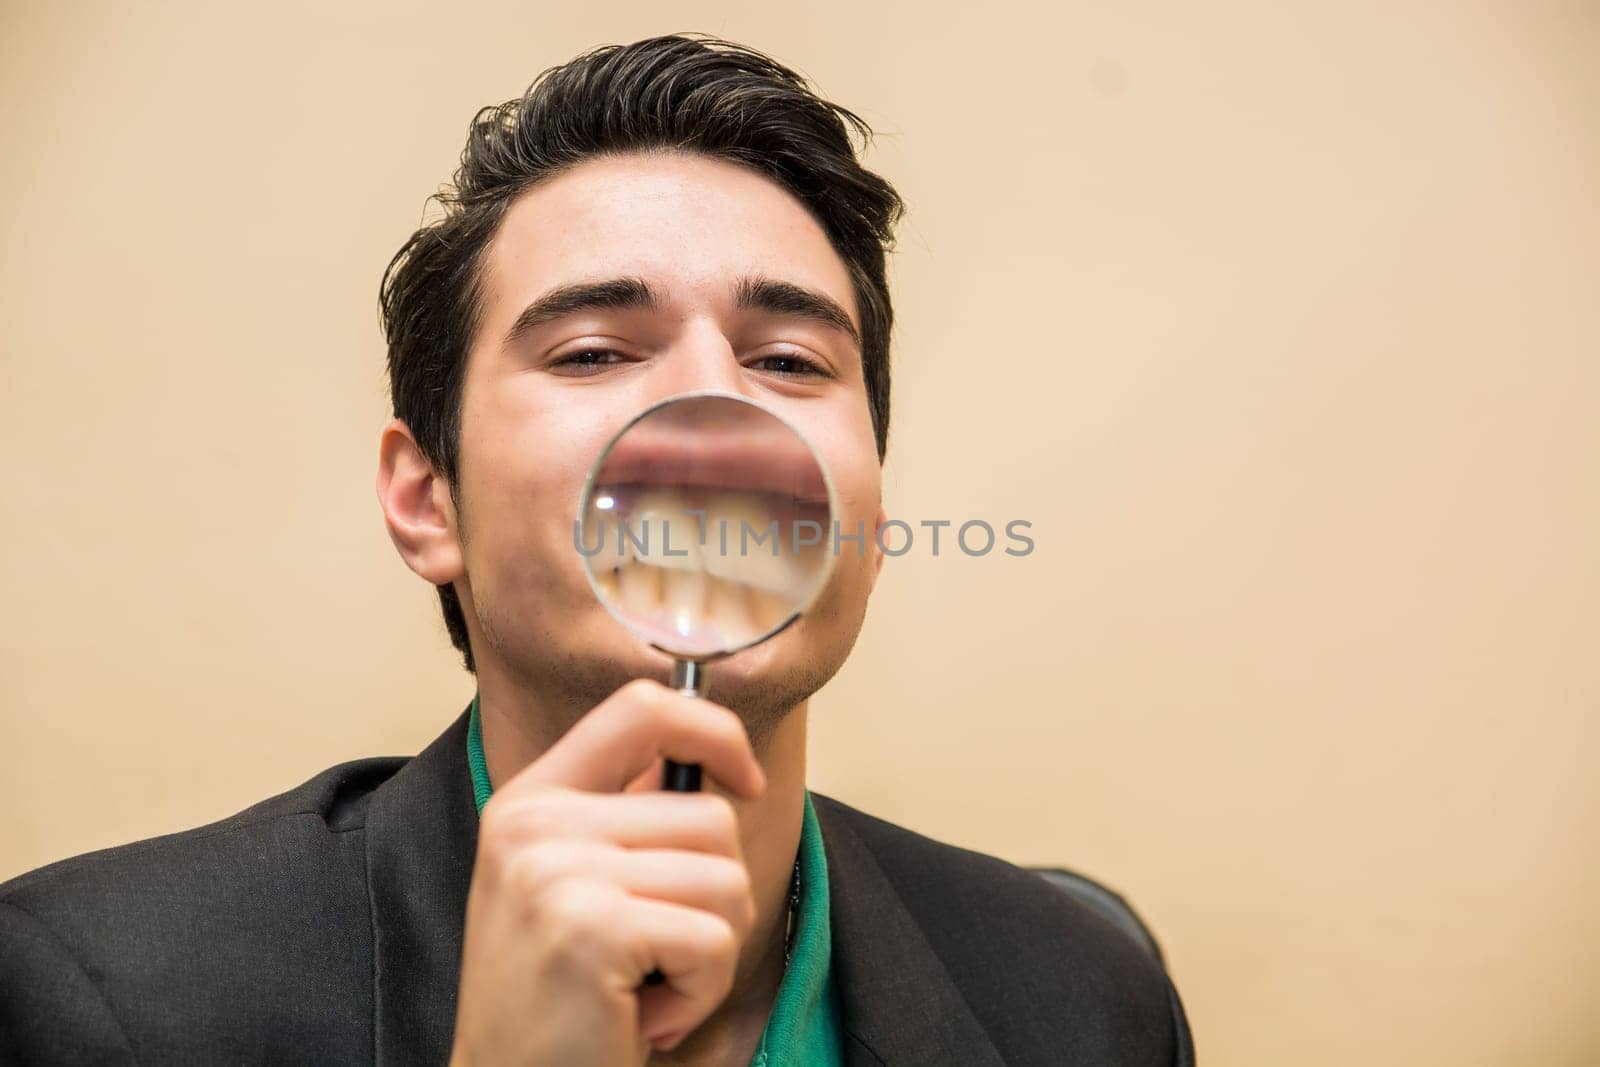 Photo of a man examining something closely with a magnifying glass by artofphoto